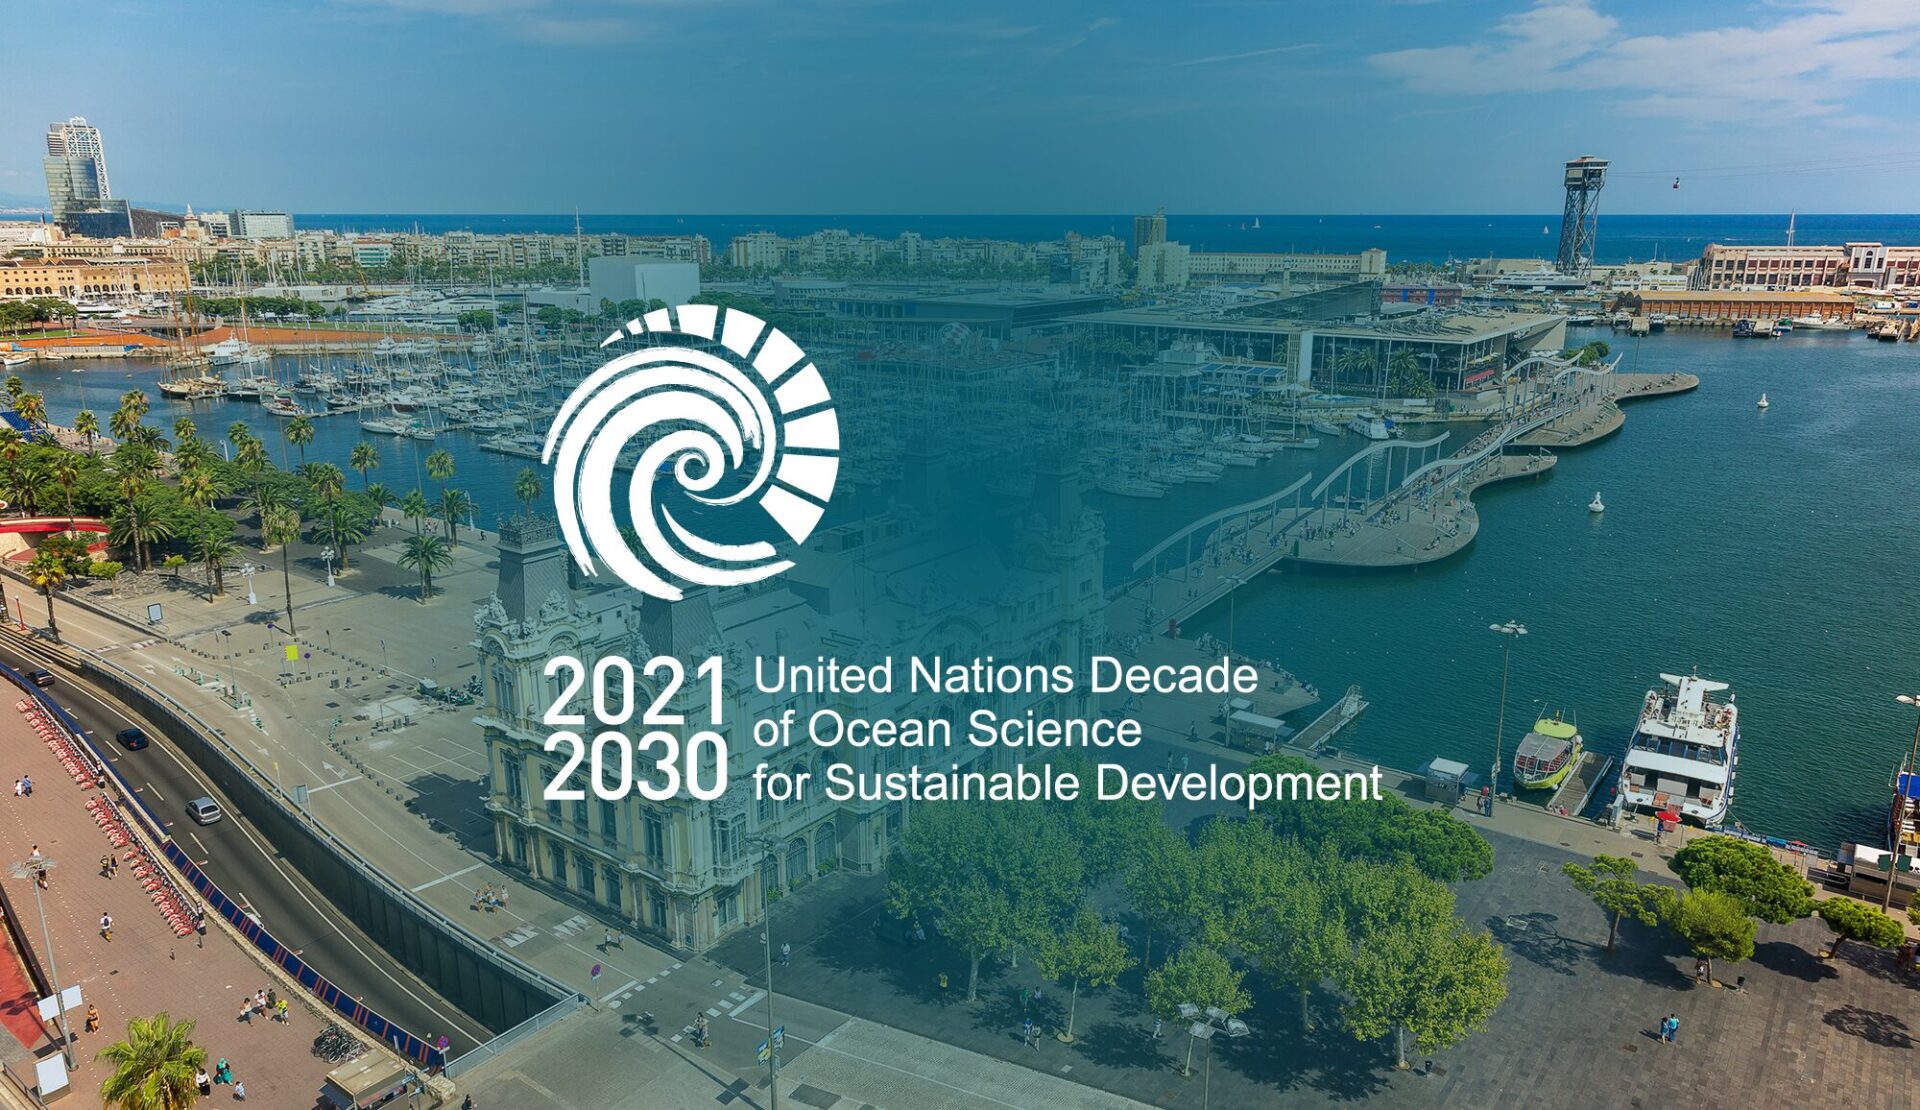 Aerial view of the City of Barcelona with the Mediteranean sea in the background. The logo of the Ocean Decade Conference on a dark teal overlay